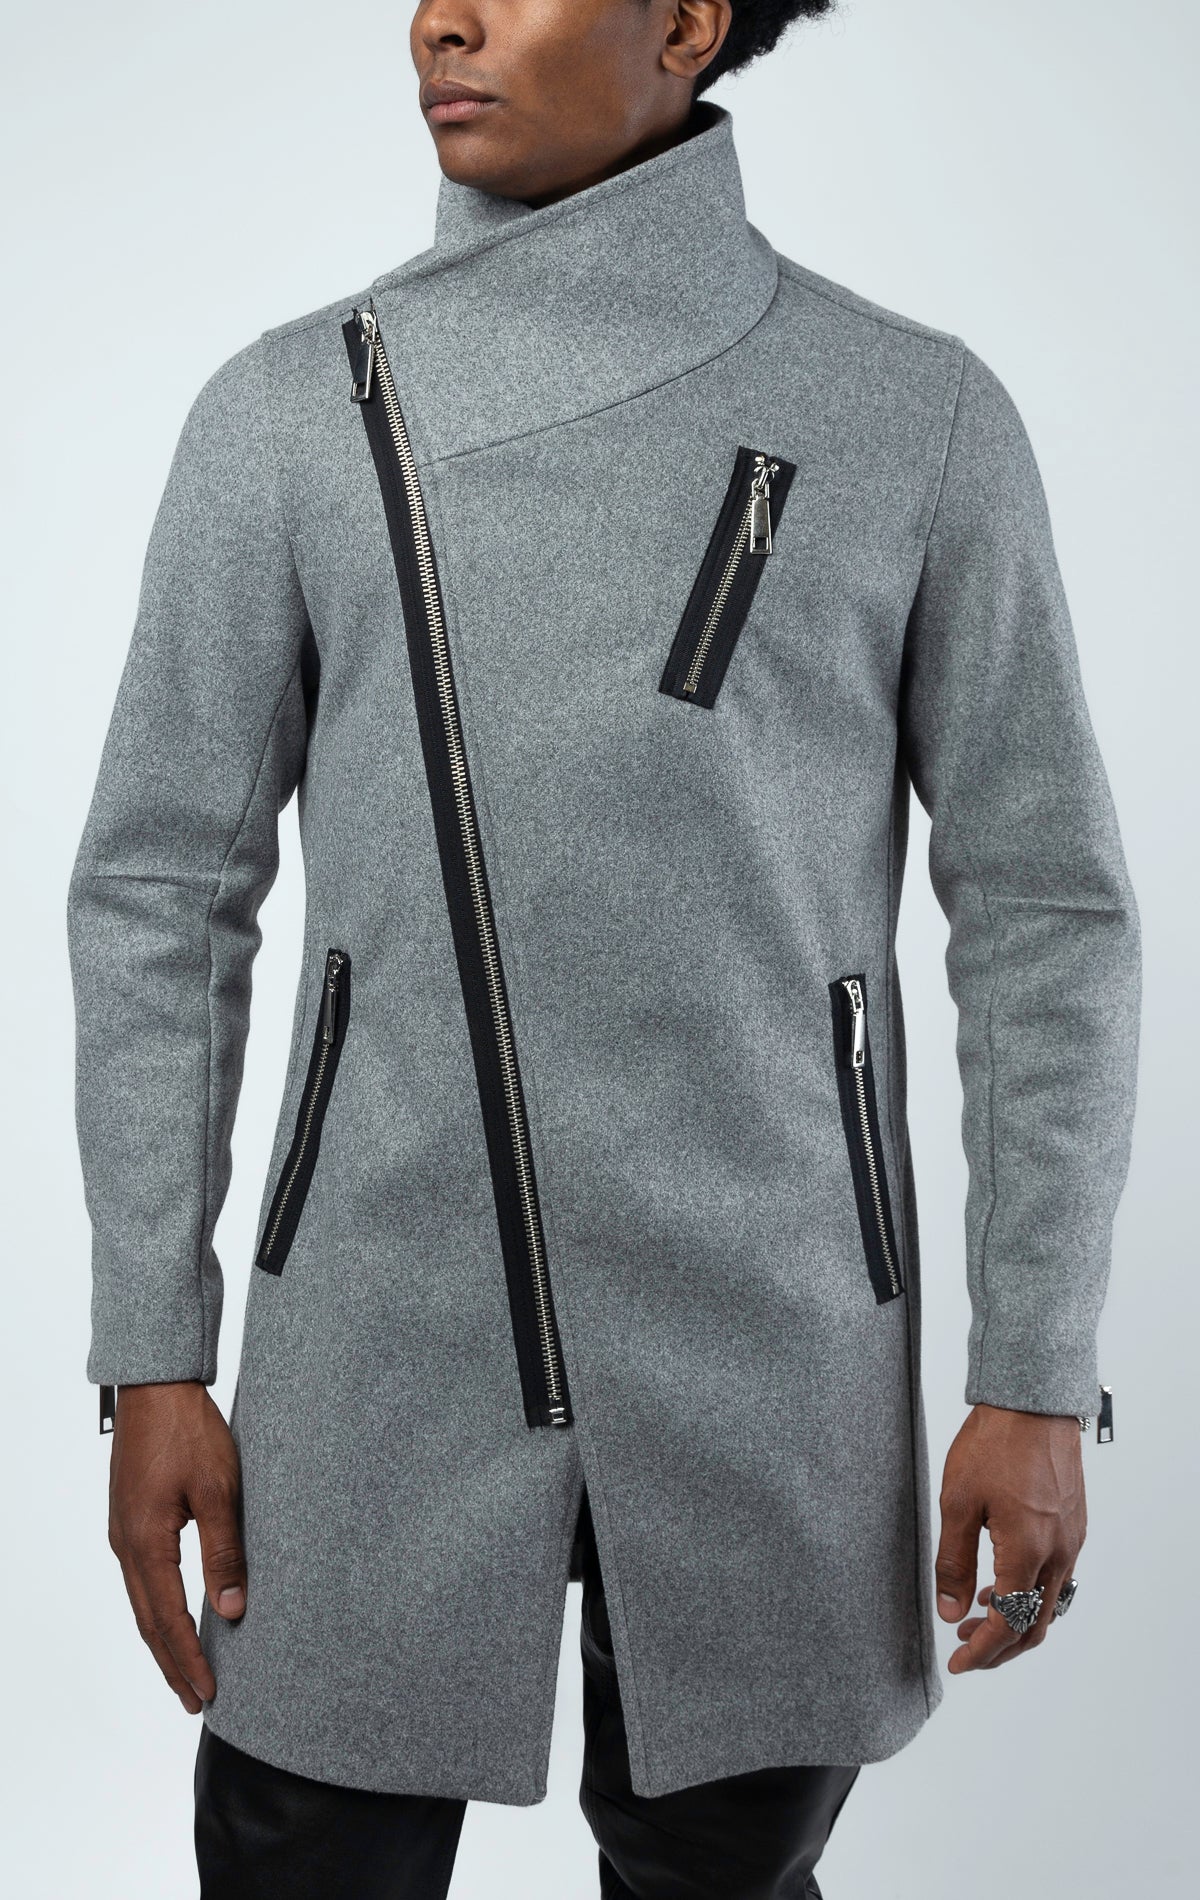 Grey long coat with angled zip closure running diagonally across the front, creating an asymmetrical design.